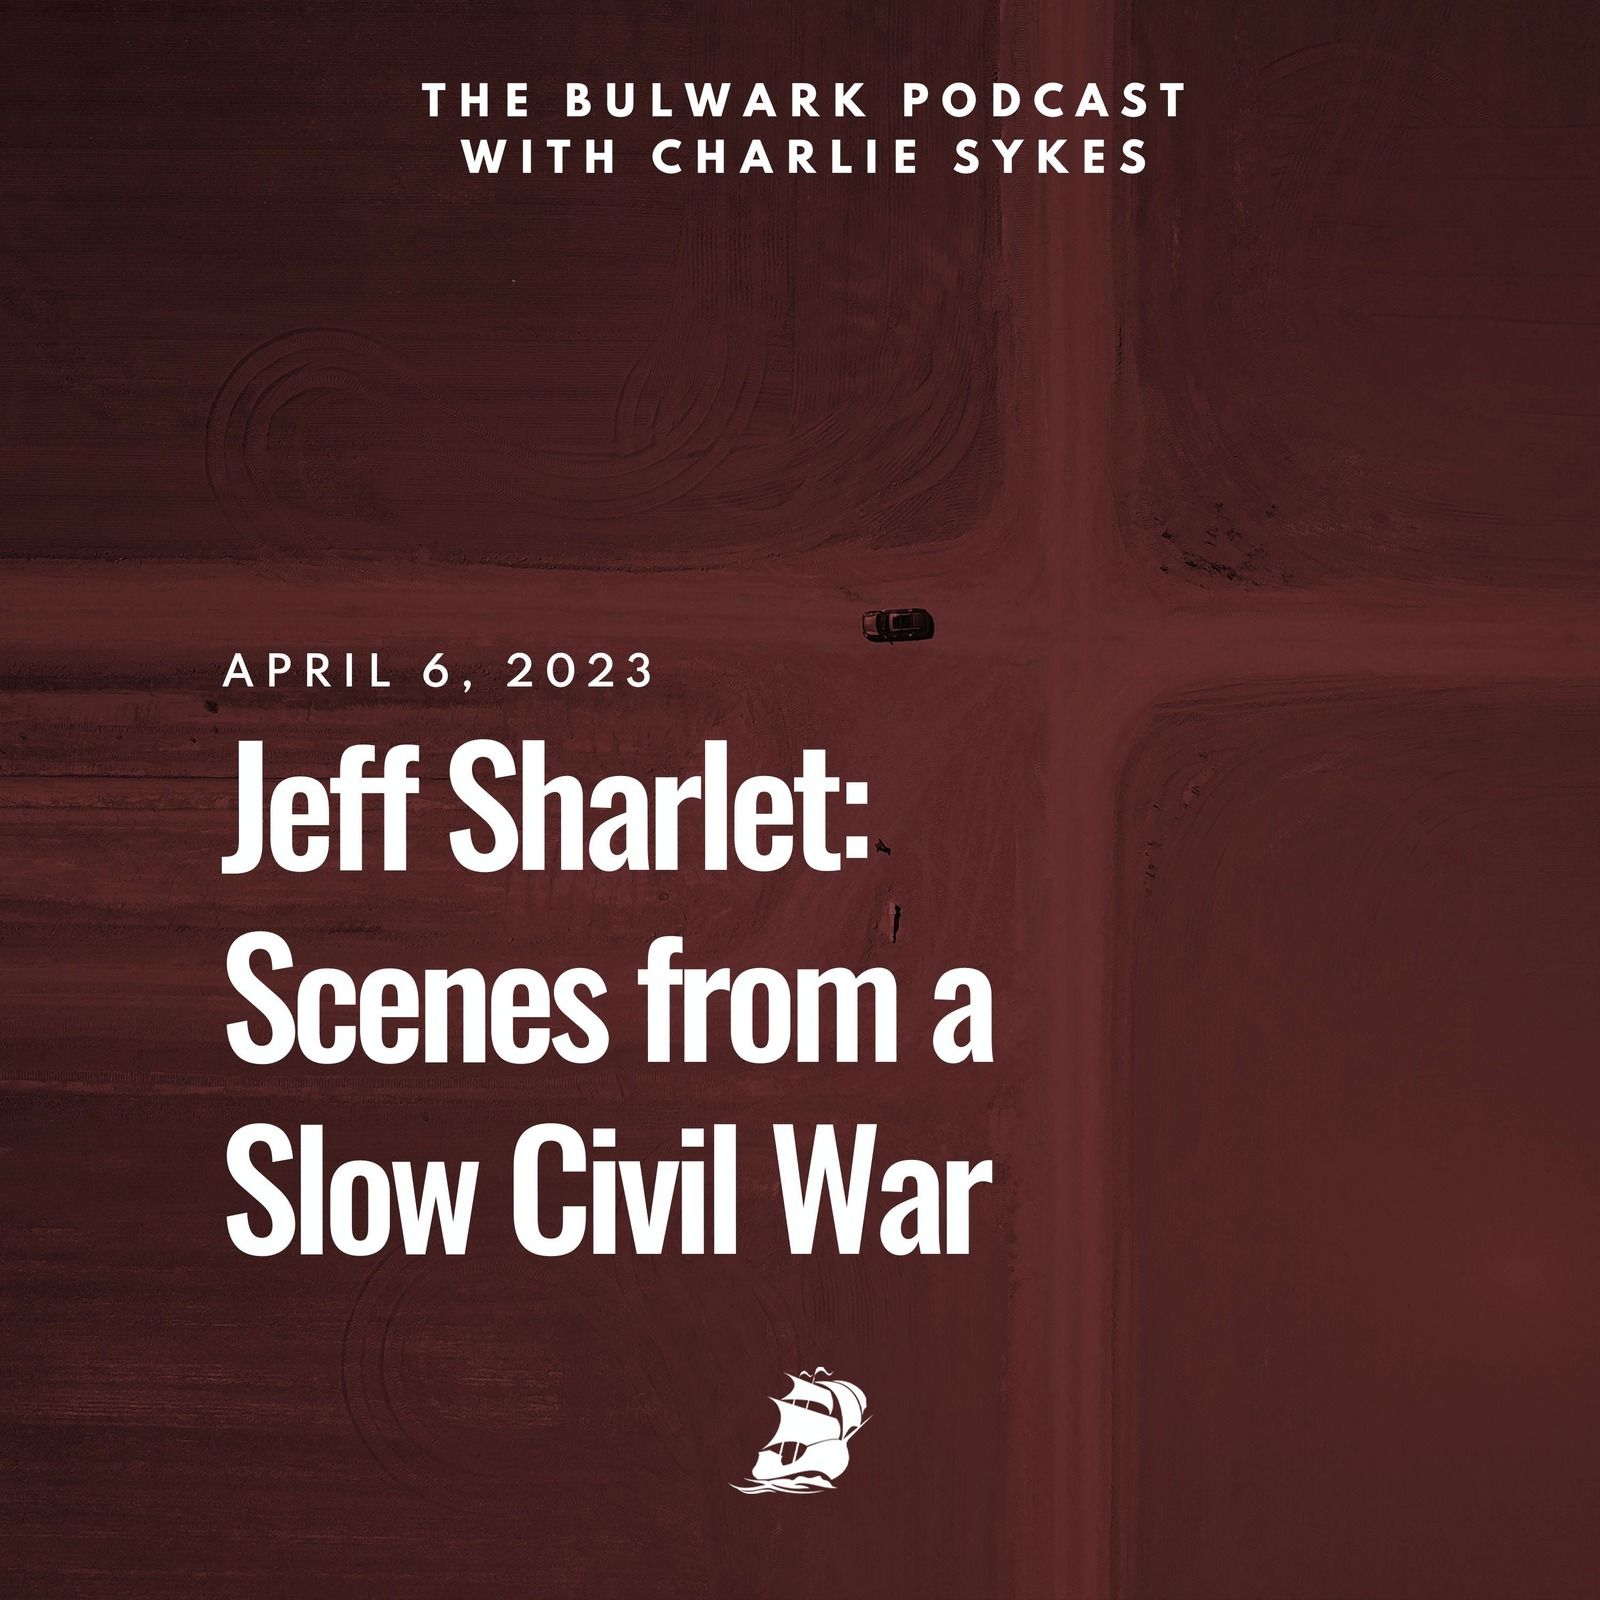 Jeff Sharlet: Scenes from a Slow Civil War by The Bulwark Podcast